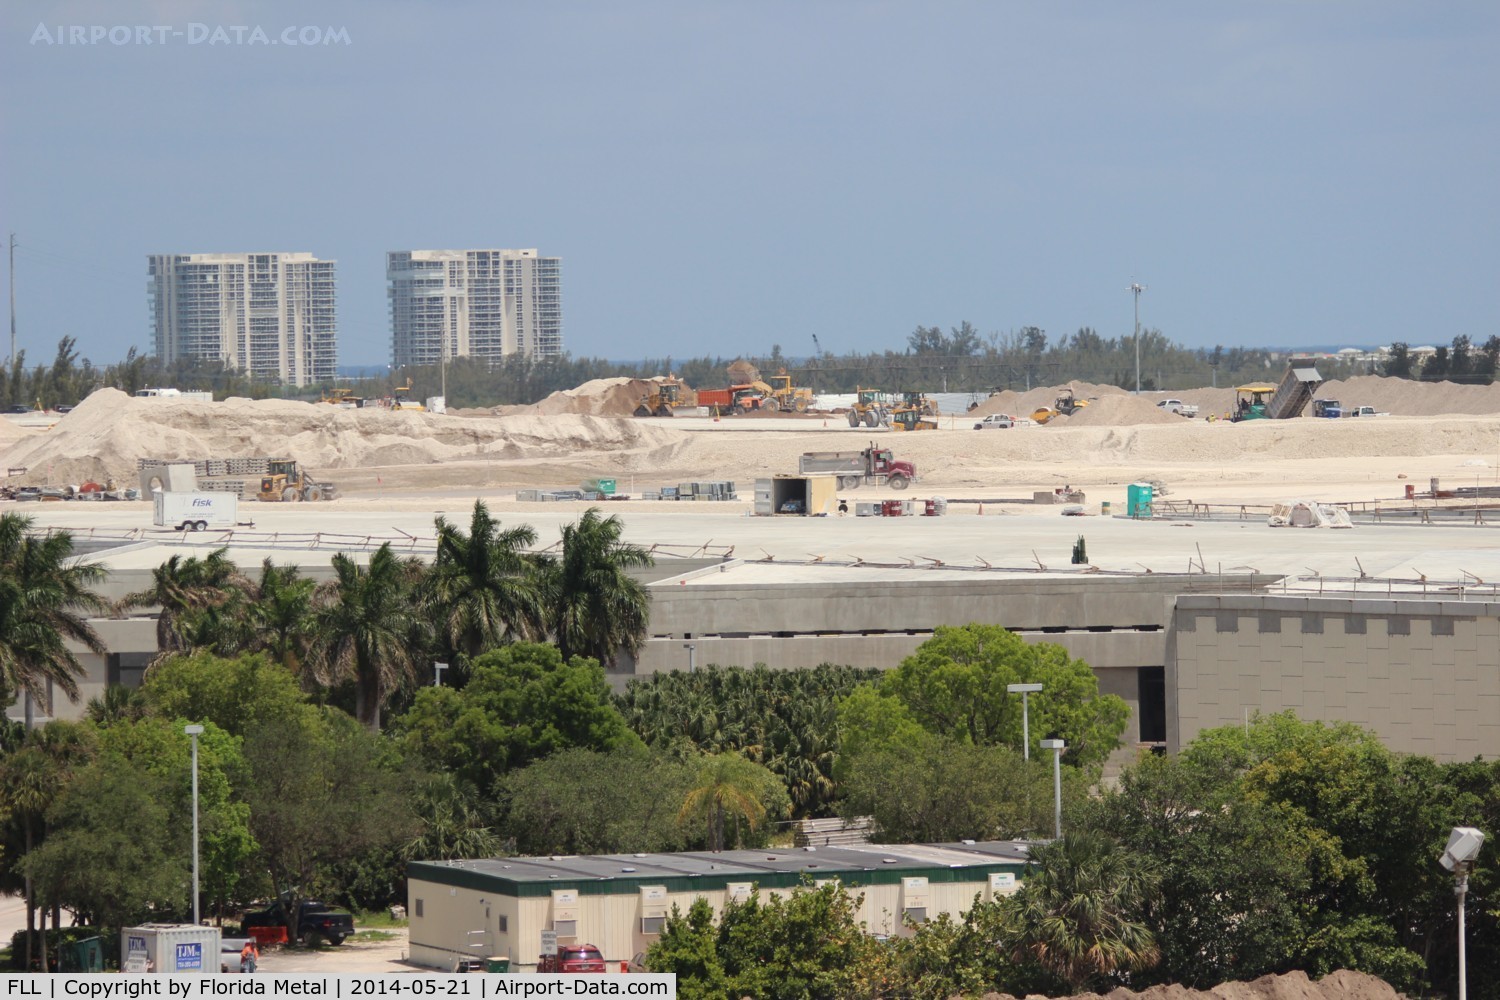 Fort Lauderdale/hollywood International Airport (FLL) - 10R/28L construction